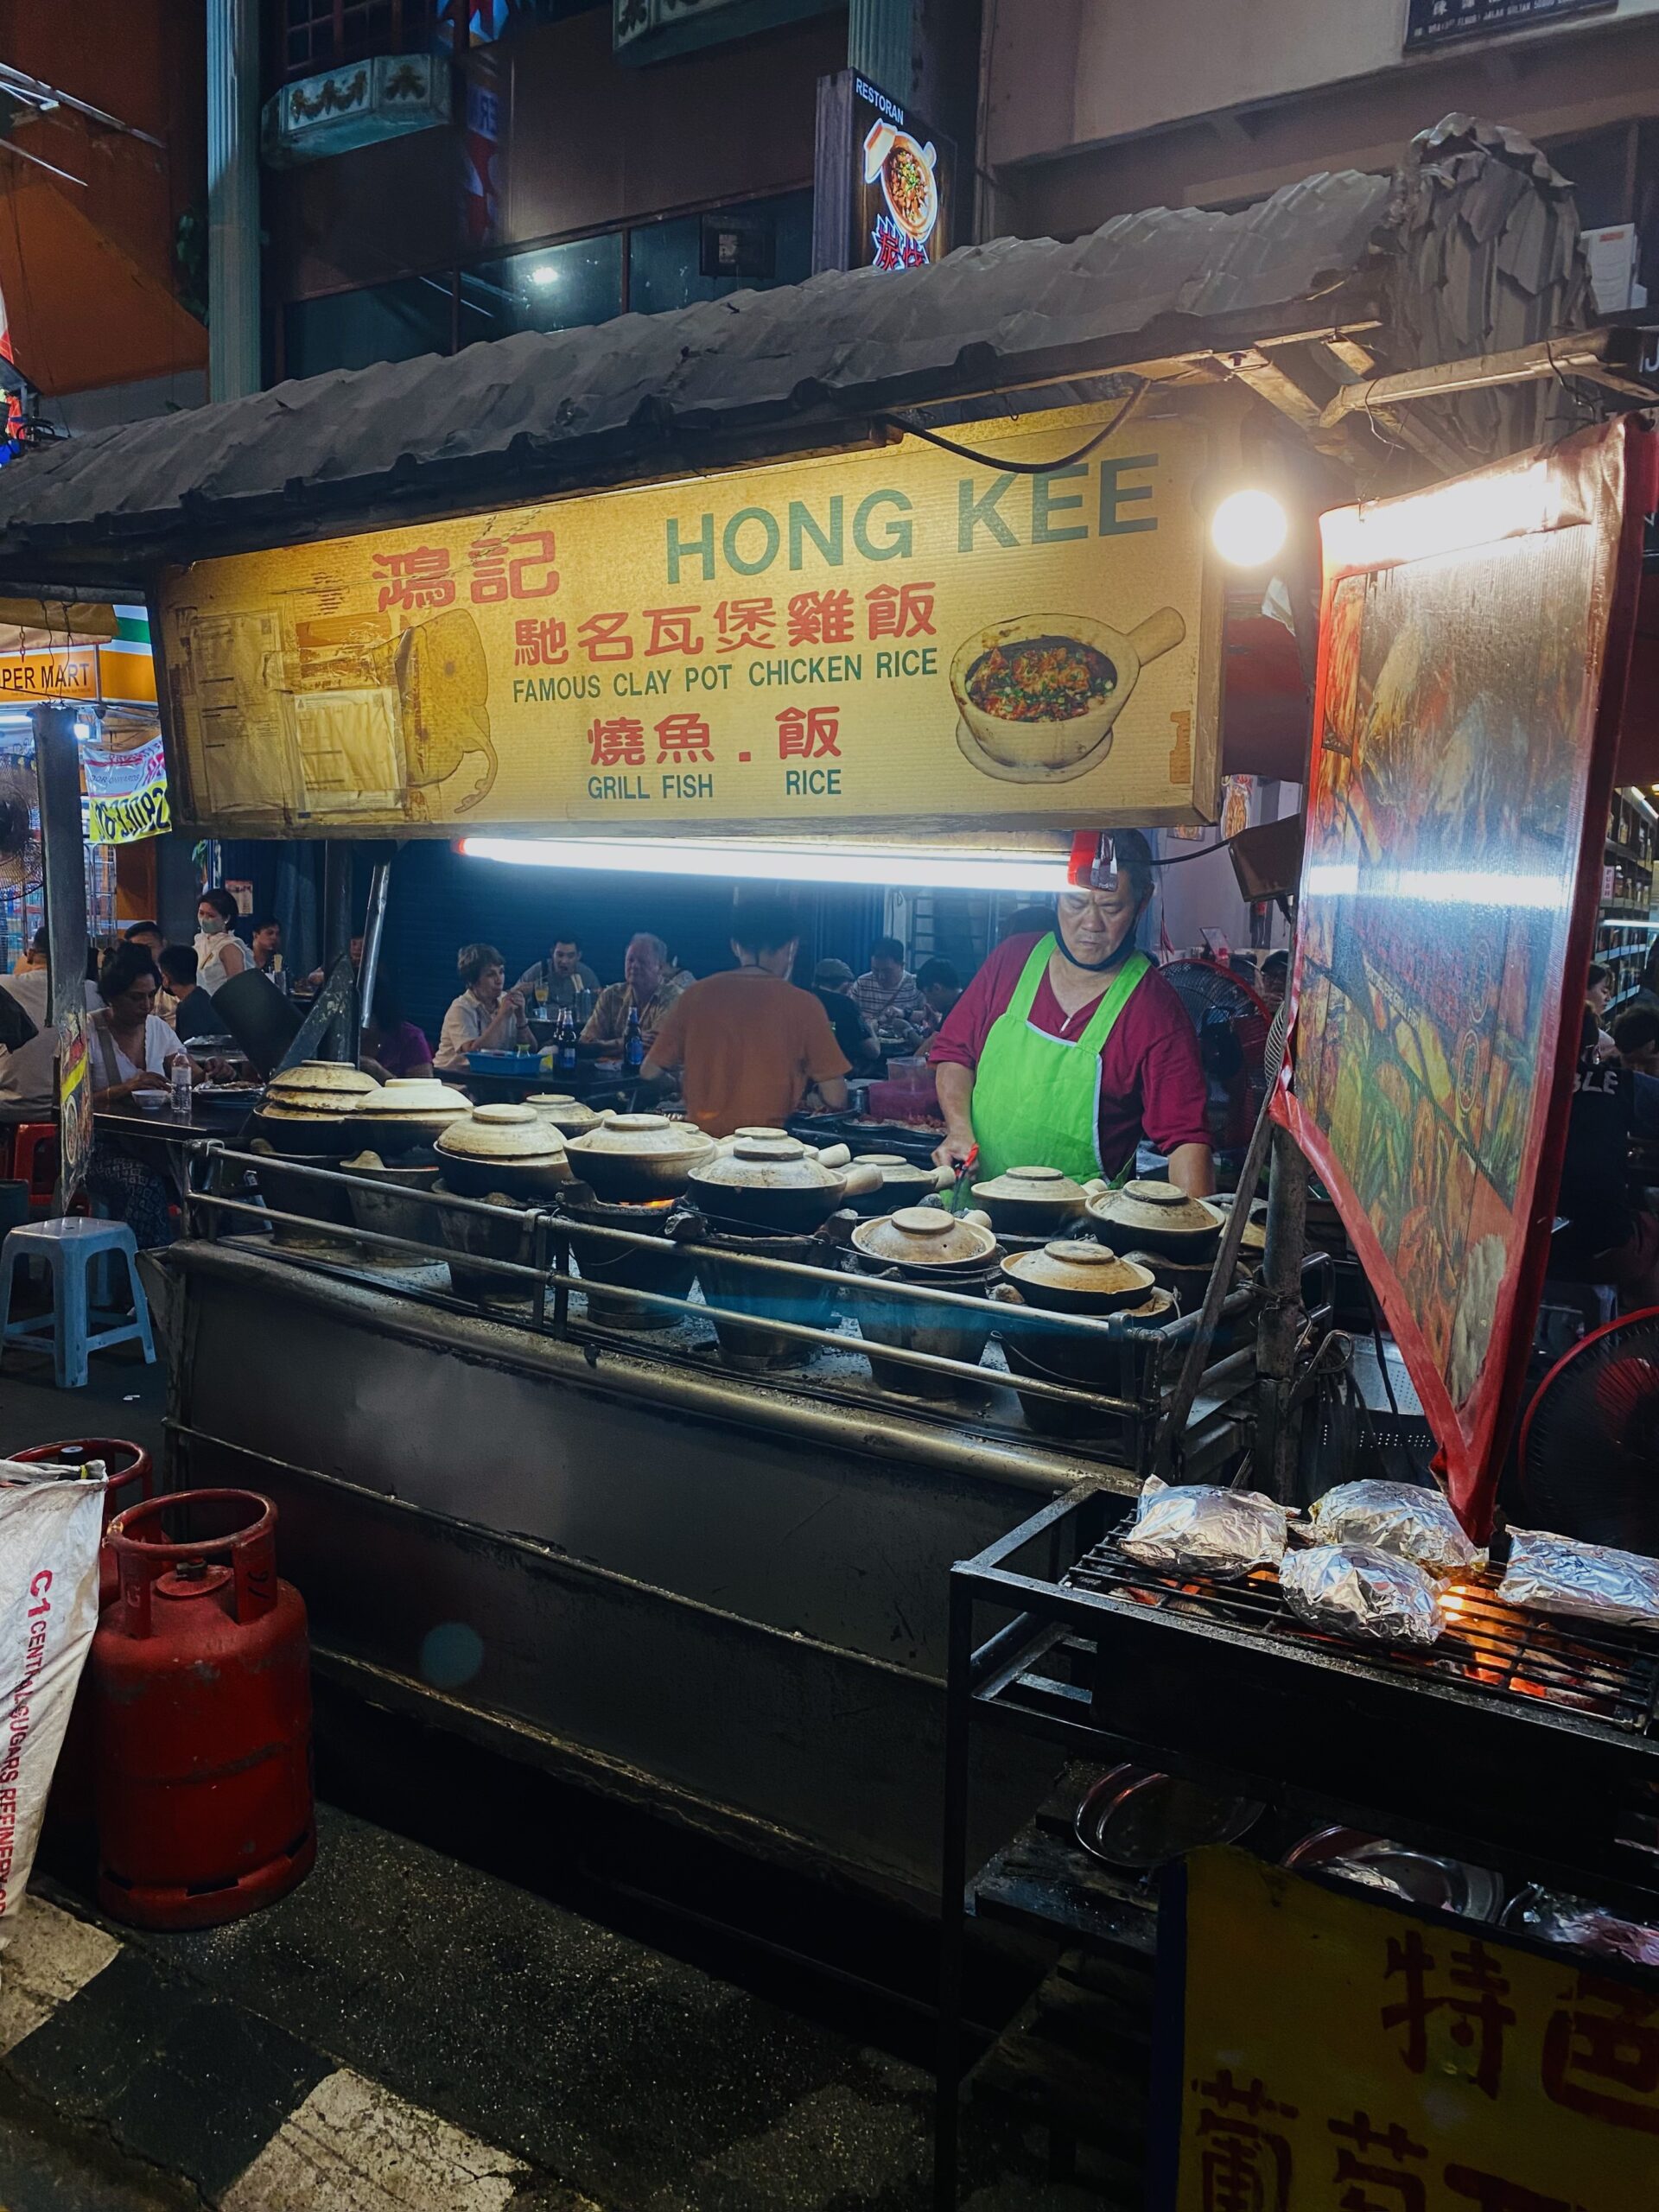 Hong_kee_claypot_chicken_rice_and_portuguese_grilled_fish_at_petaling_street_2